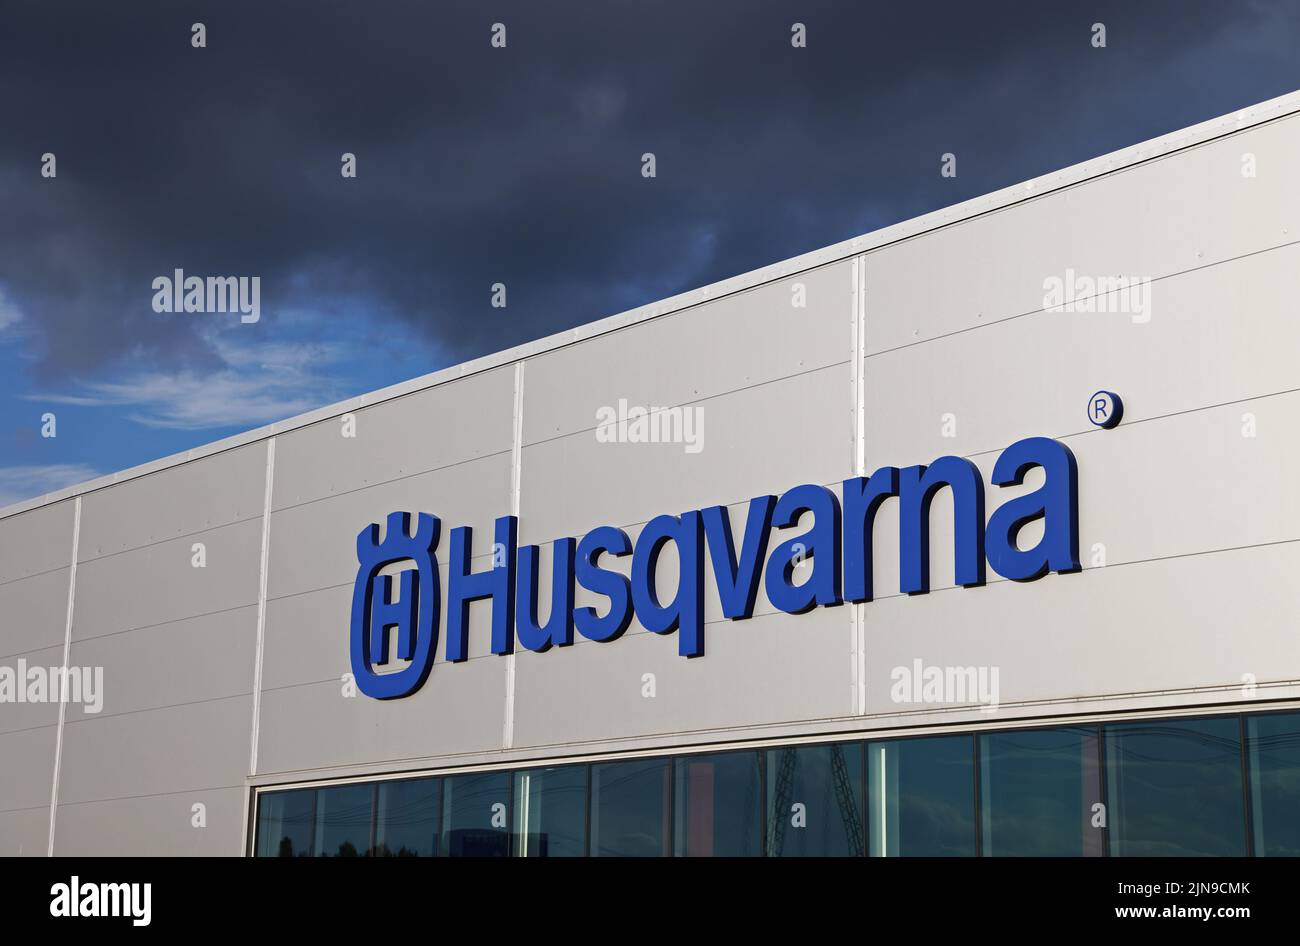 Husqvarna AB Construction Products, Åsbro, Sweden. Husqvarna Construction Products is part of Husqvarna AB and is the market leader in machines and diamond tools for the construction and stone industries. The product range includes cutting machines, drilling machines, diamond tools, floor, bench, wall and wire saws as well as machines for surface treatment and demolition. Stock Photo